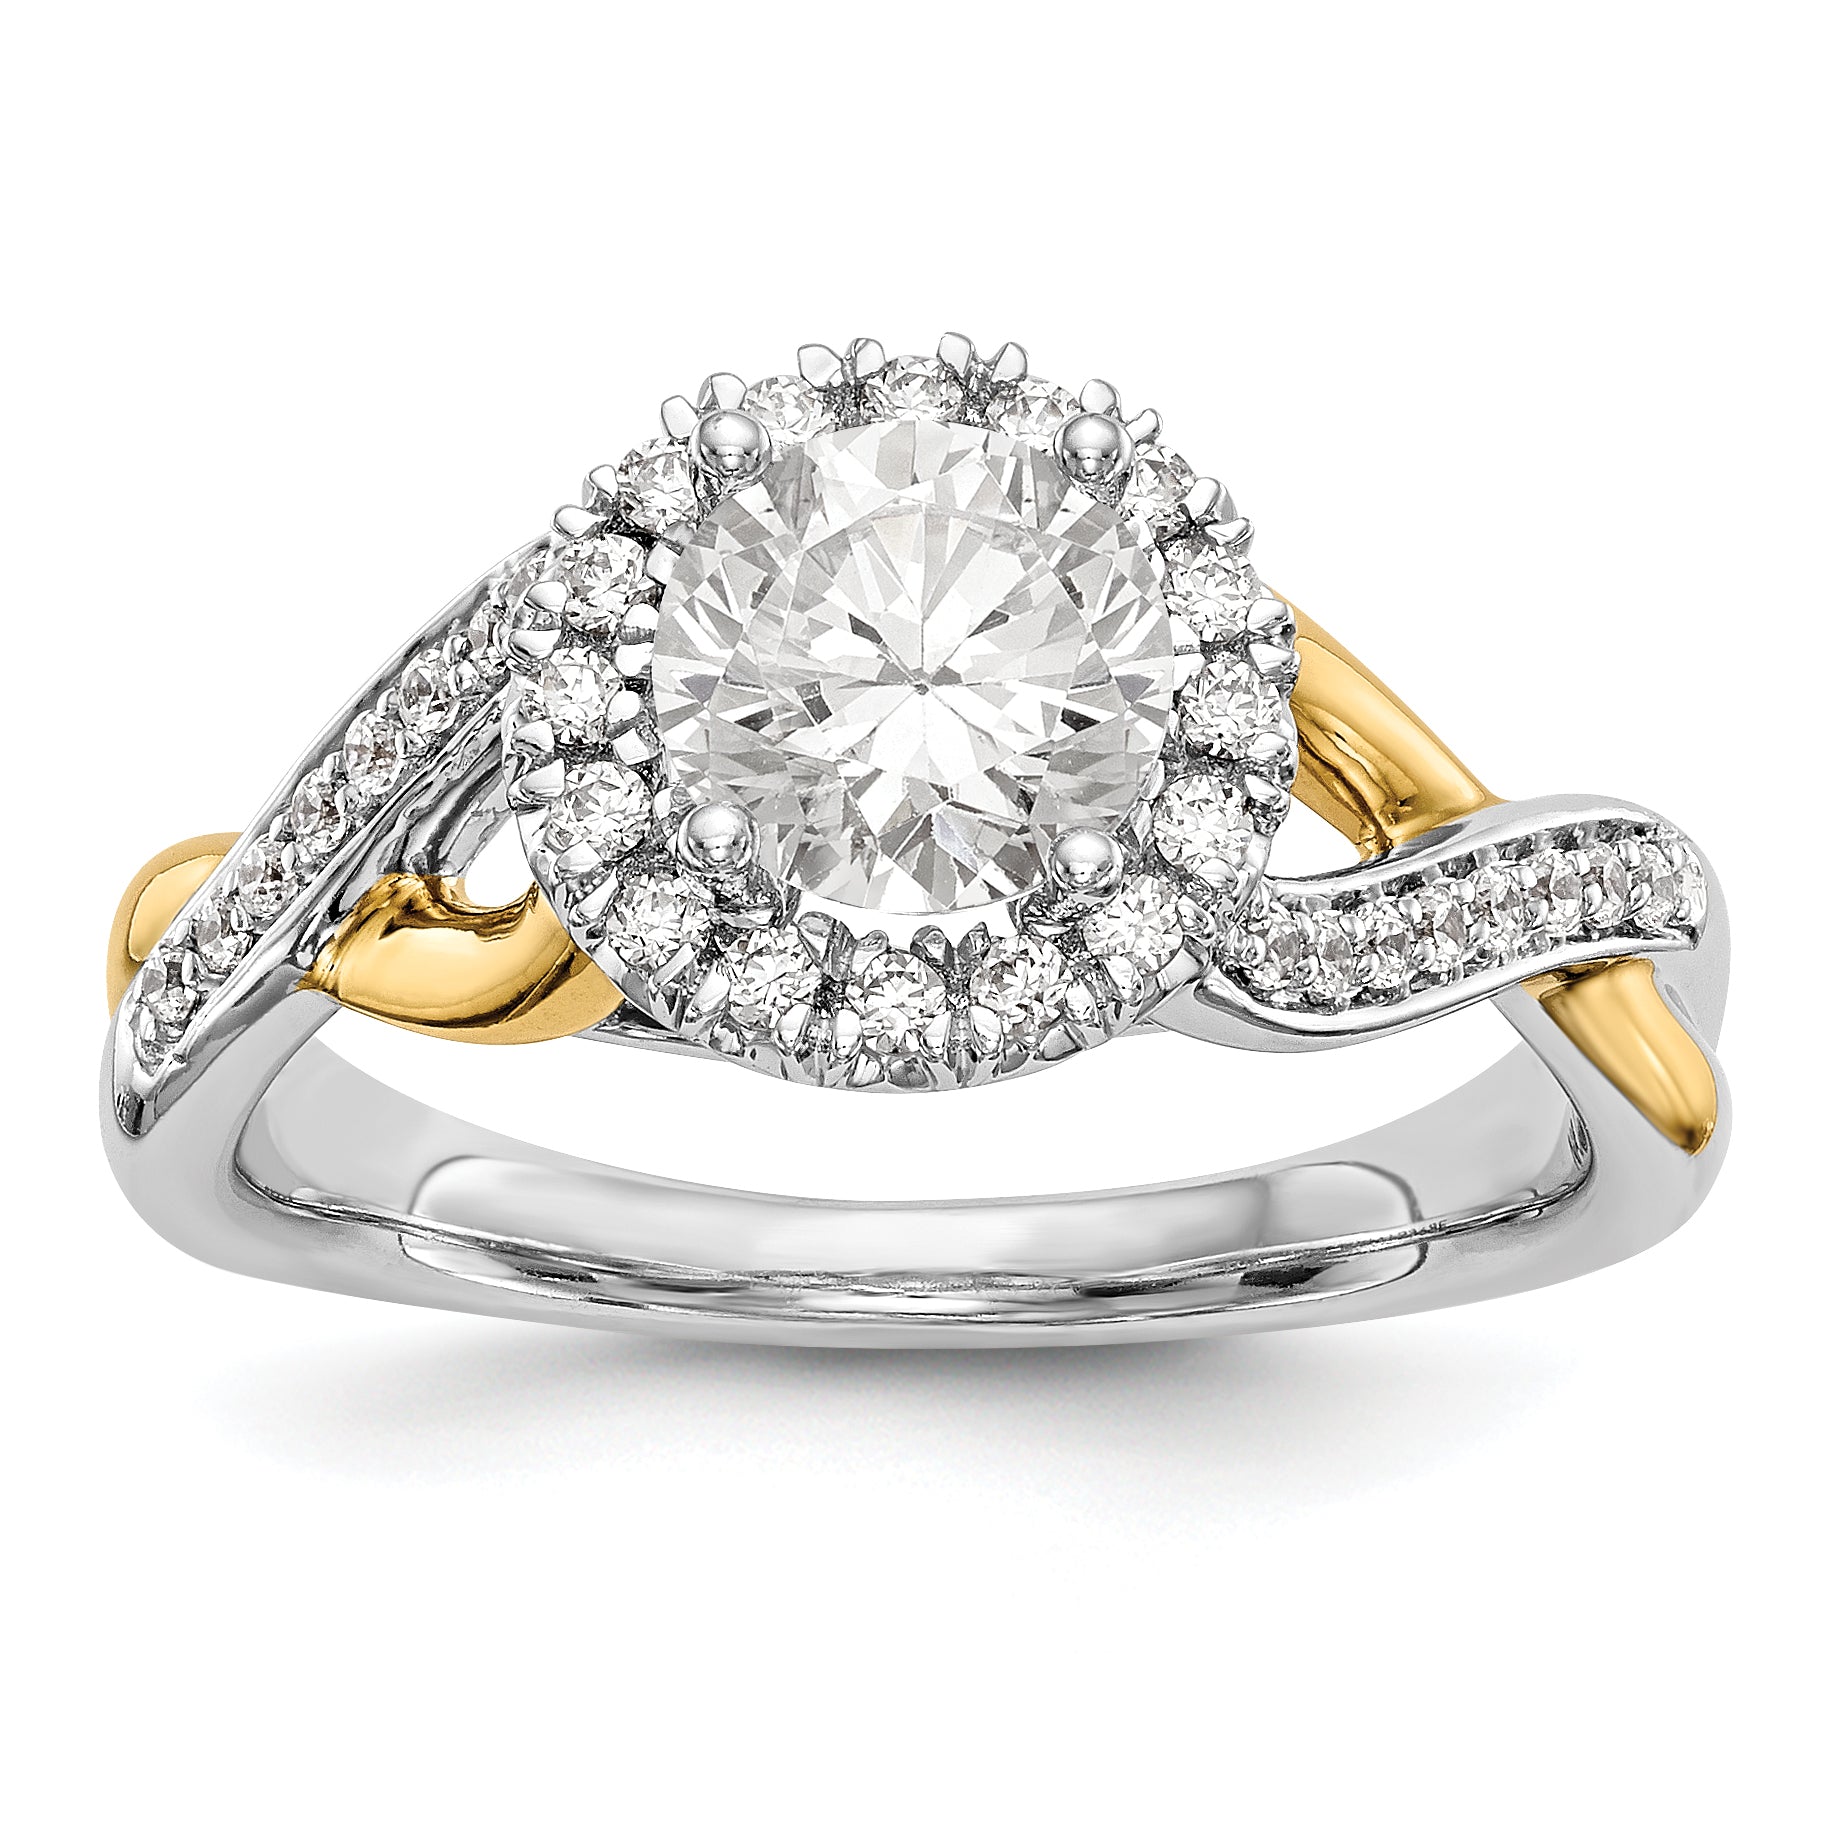 Image of ID 1 14K Yellow and White Gold Round Simulated Diamond Halo Engagement Ring